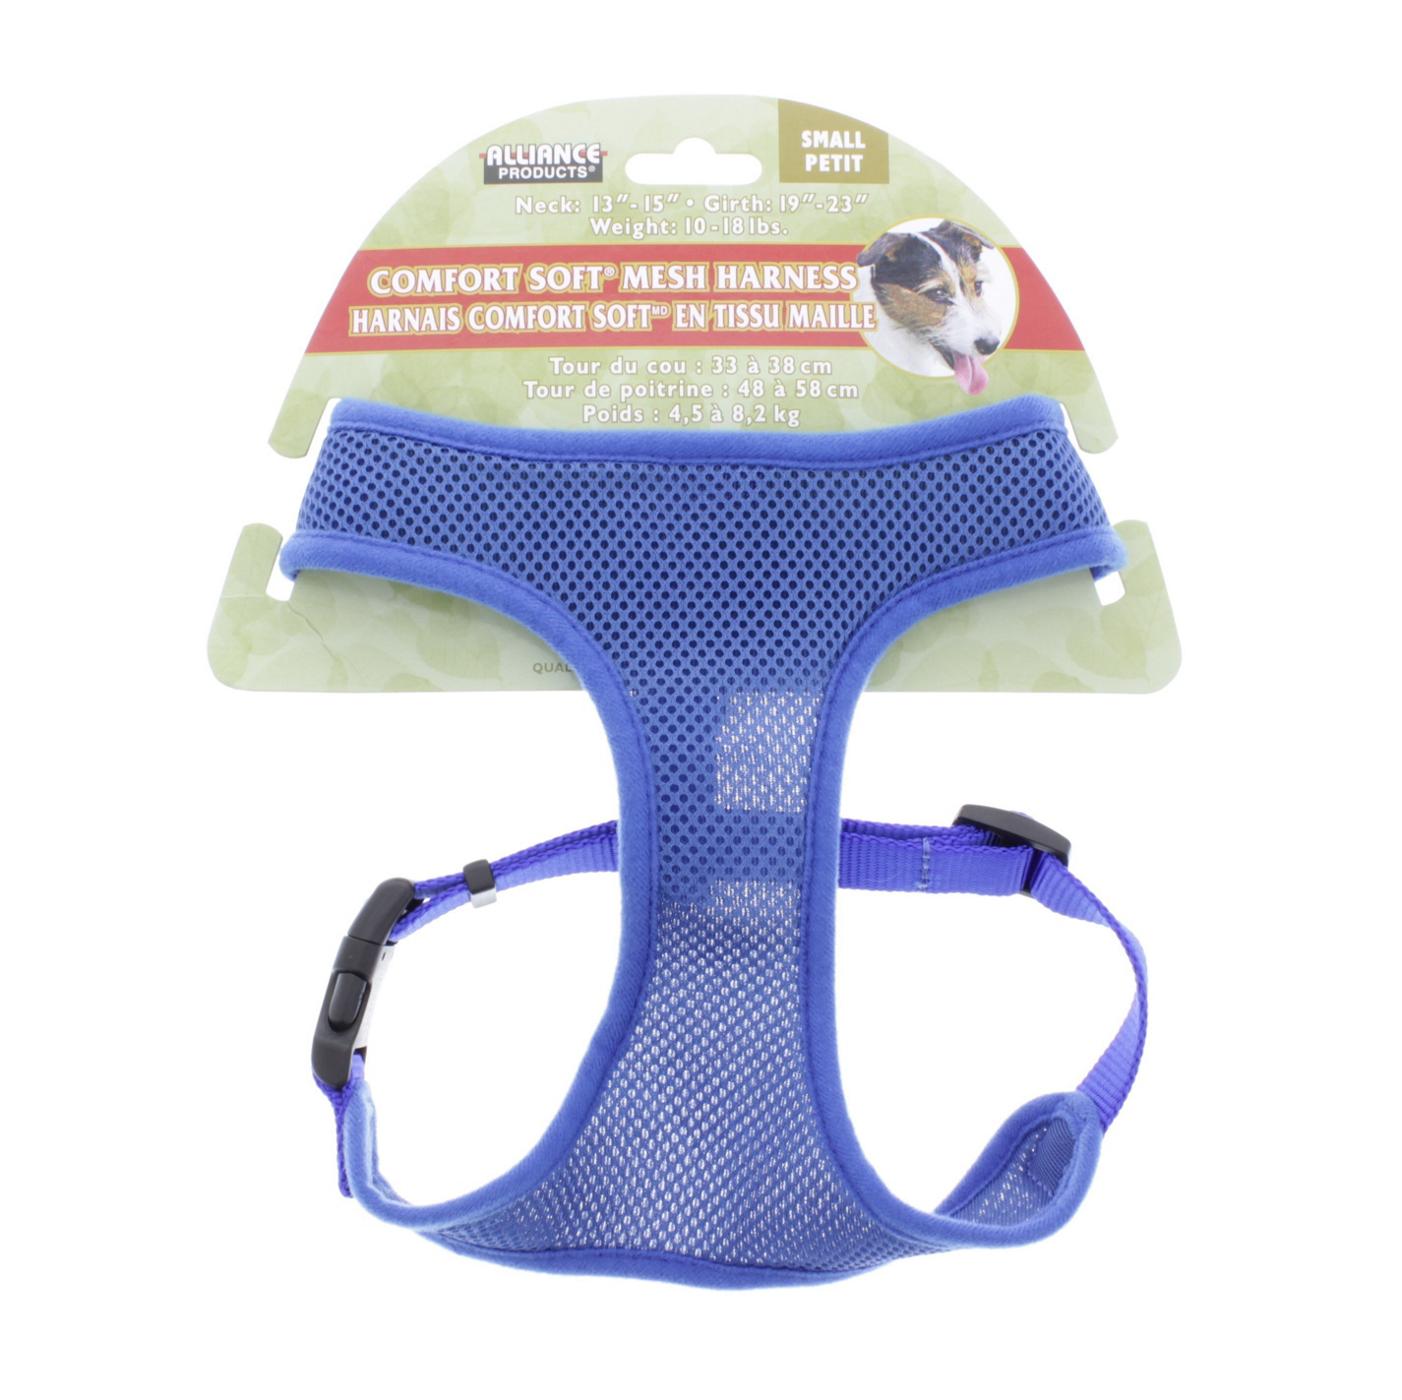 Coastal Pet Products Comfort Soft Small Adjustable Harness, Assorted Colors; image 3 of 3